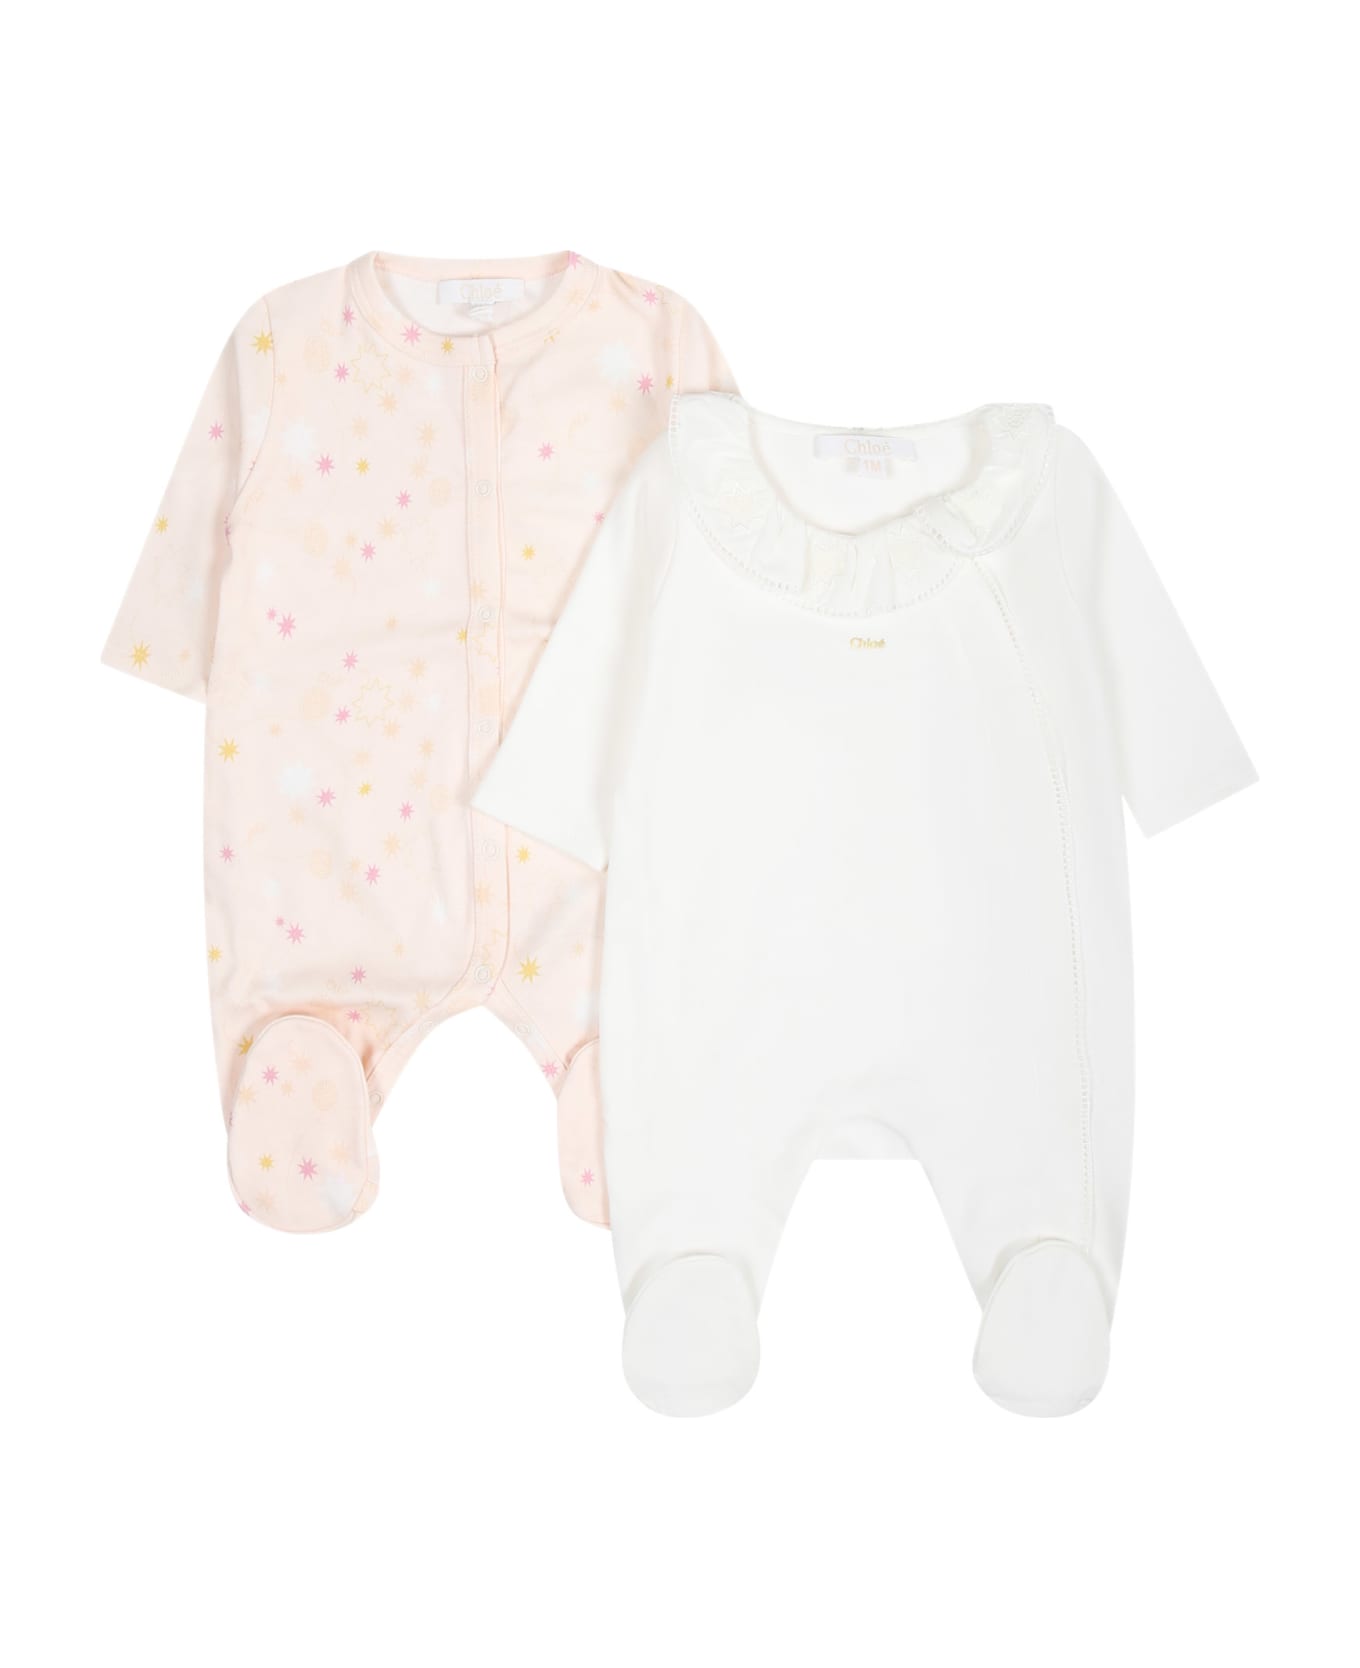 Chloé Multicolored Set For Baby Girl - Rosa